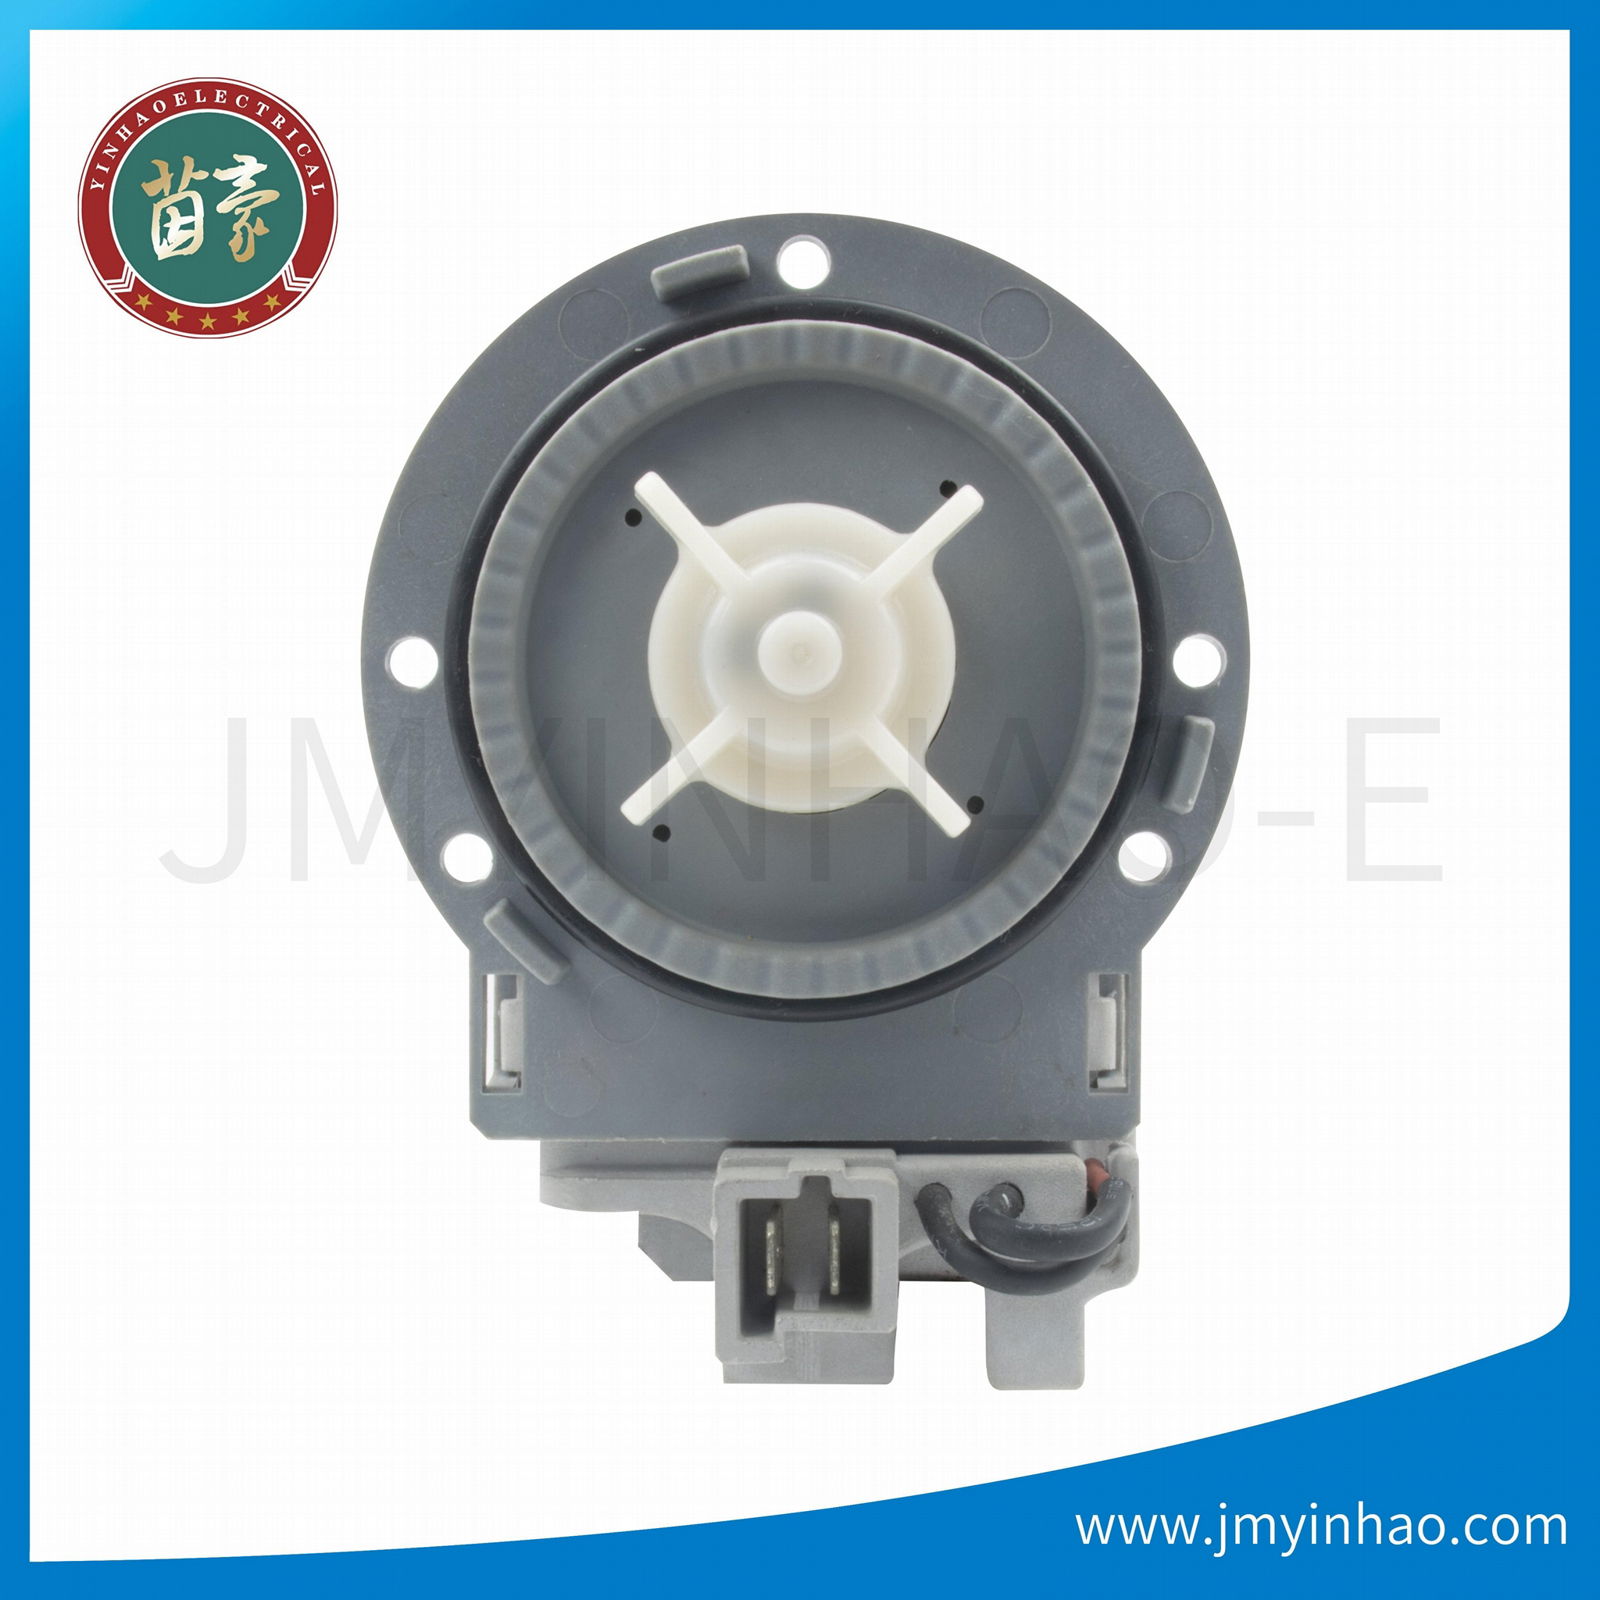 220V drain pump for vegetable and fruit washer 2